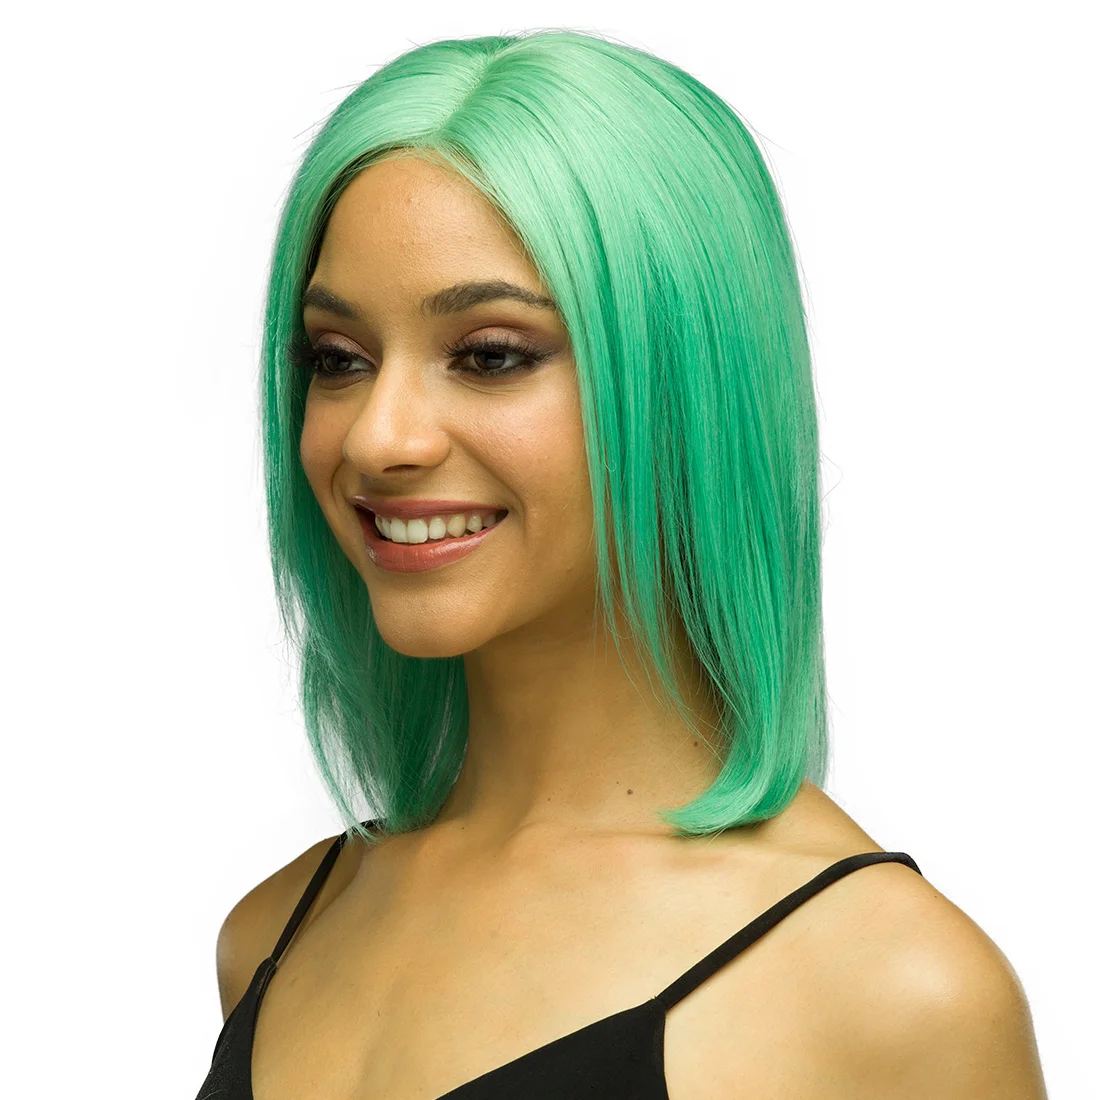 Korean Transparent color Lace Front Green Wig, 8 10 Inch Bob Wigs Sunnymay Human Hair Wigs With Elastic Band